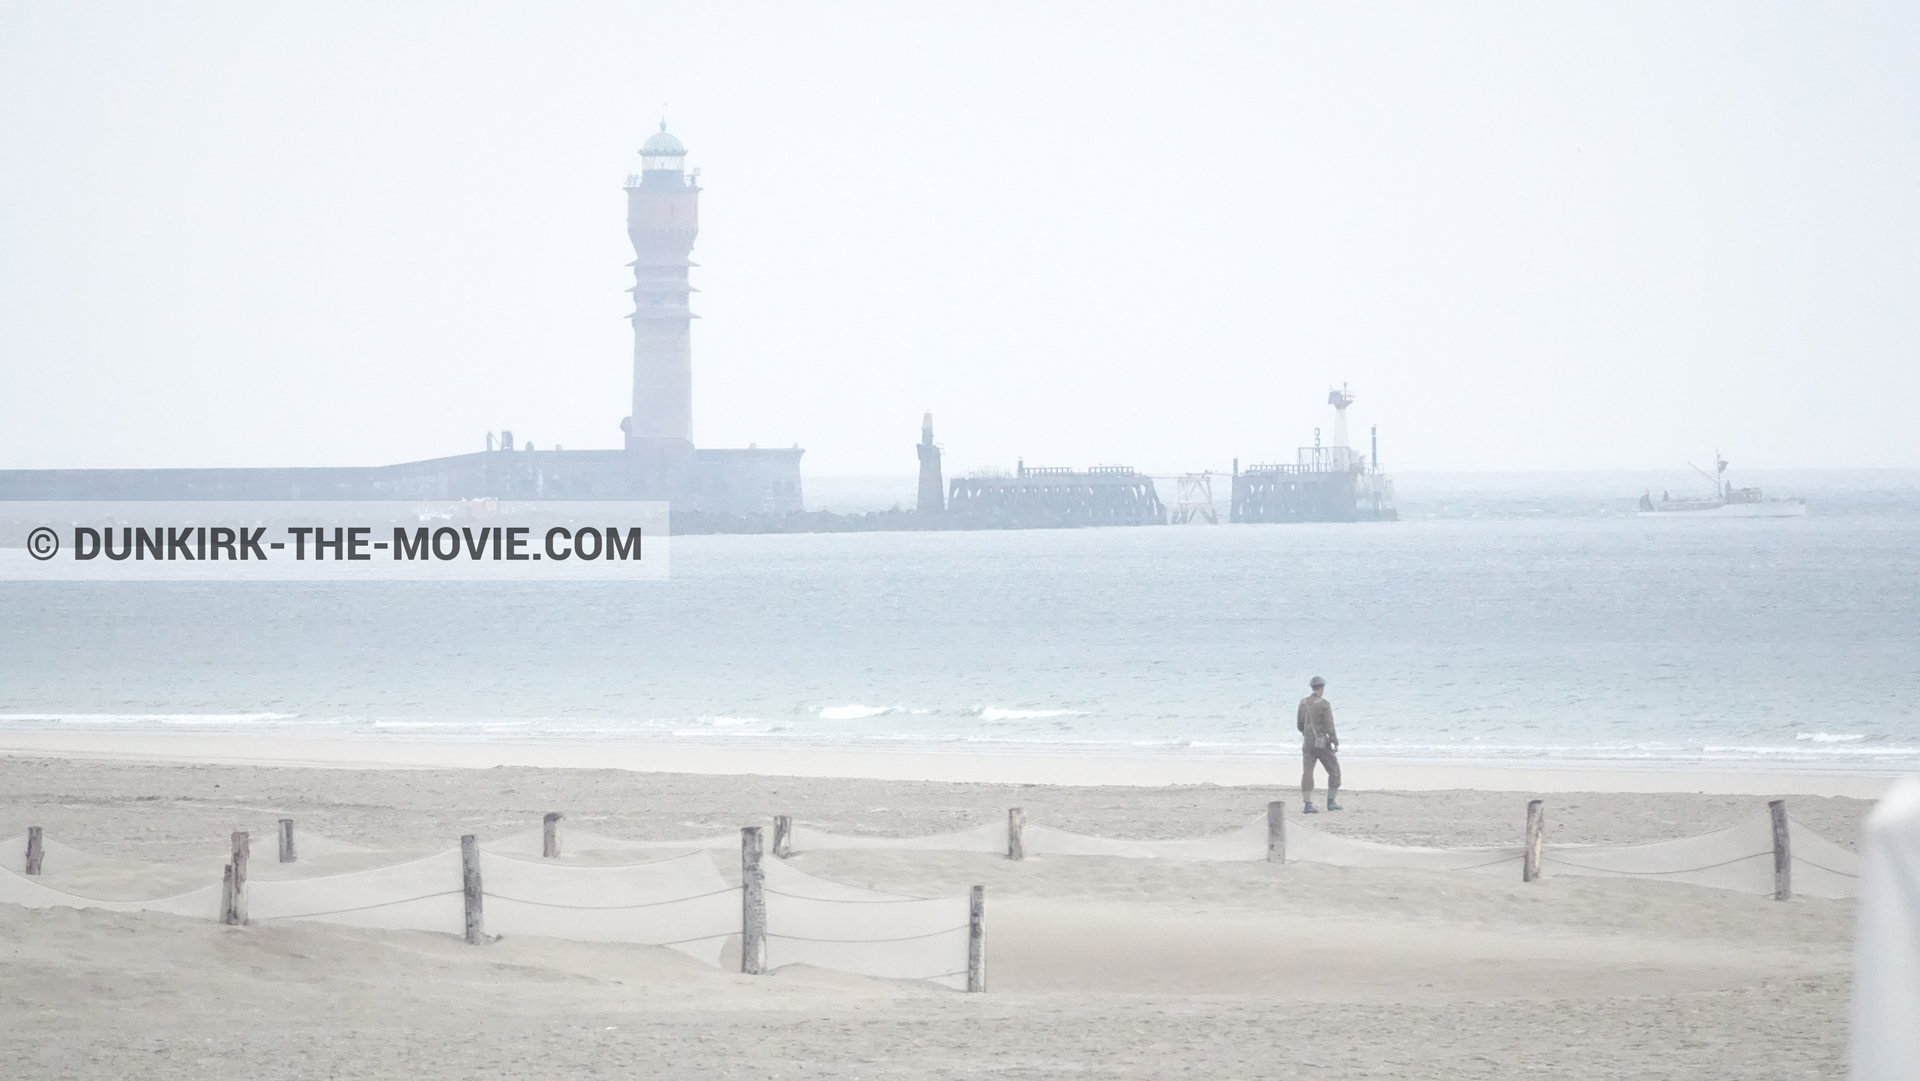 Picture with supernumeraries, St Pol sur Mer lighthouse, beach,  from behind the scene of the Dunkirk movie by Nolan